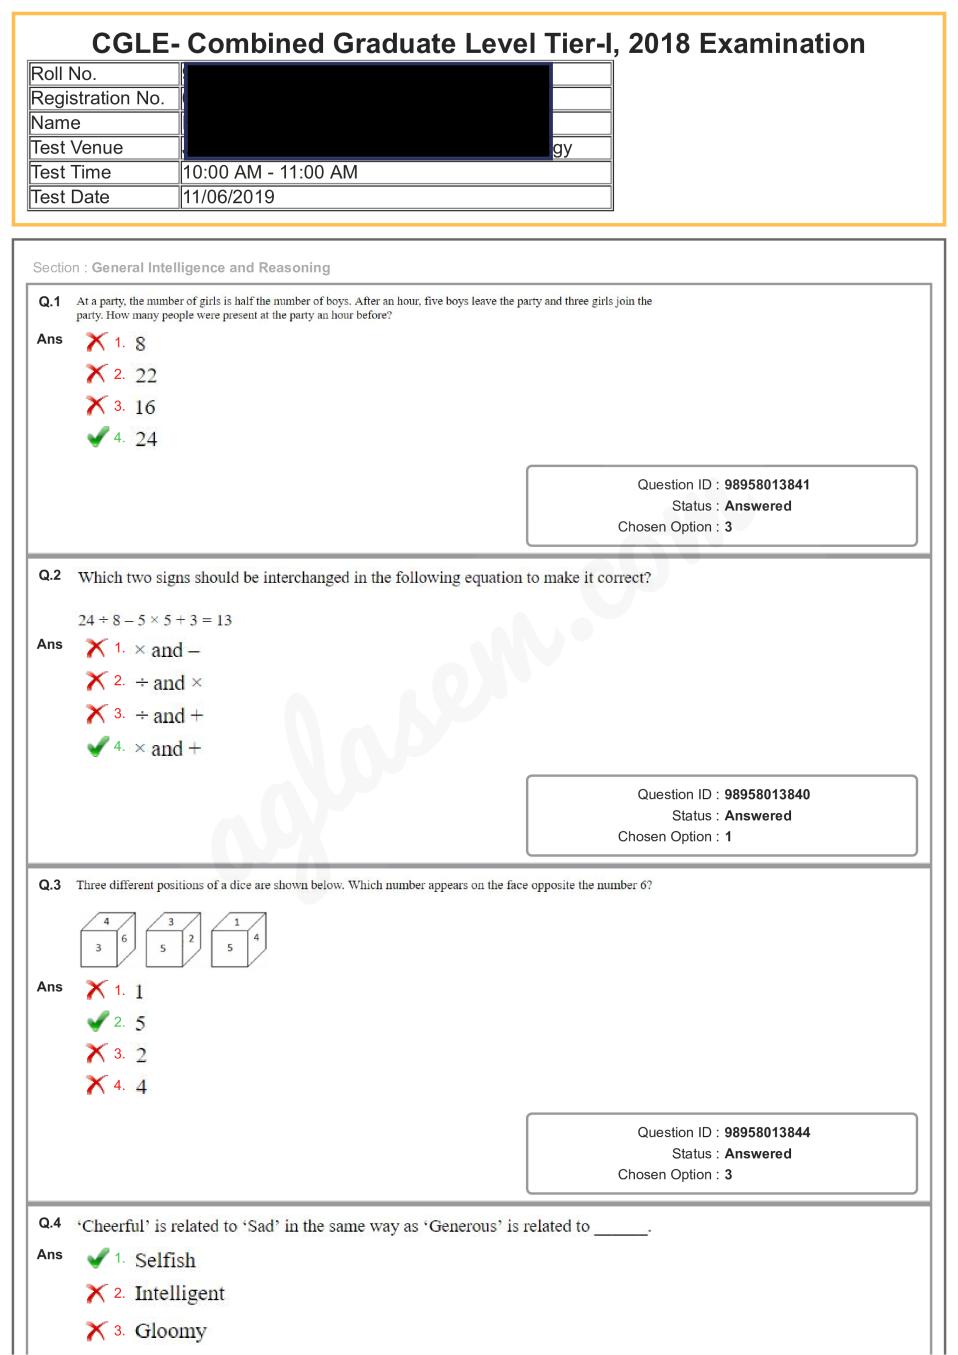 SSC CGL Question Paper Tier 1 2018 Exam - 11 jun 2019 first shift - Page 1